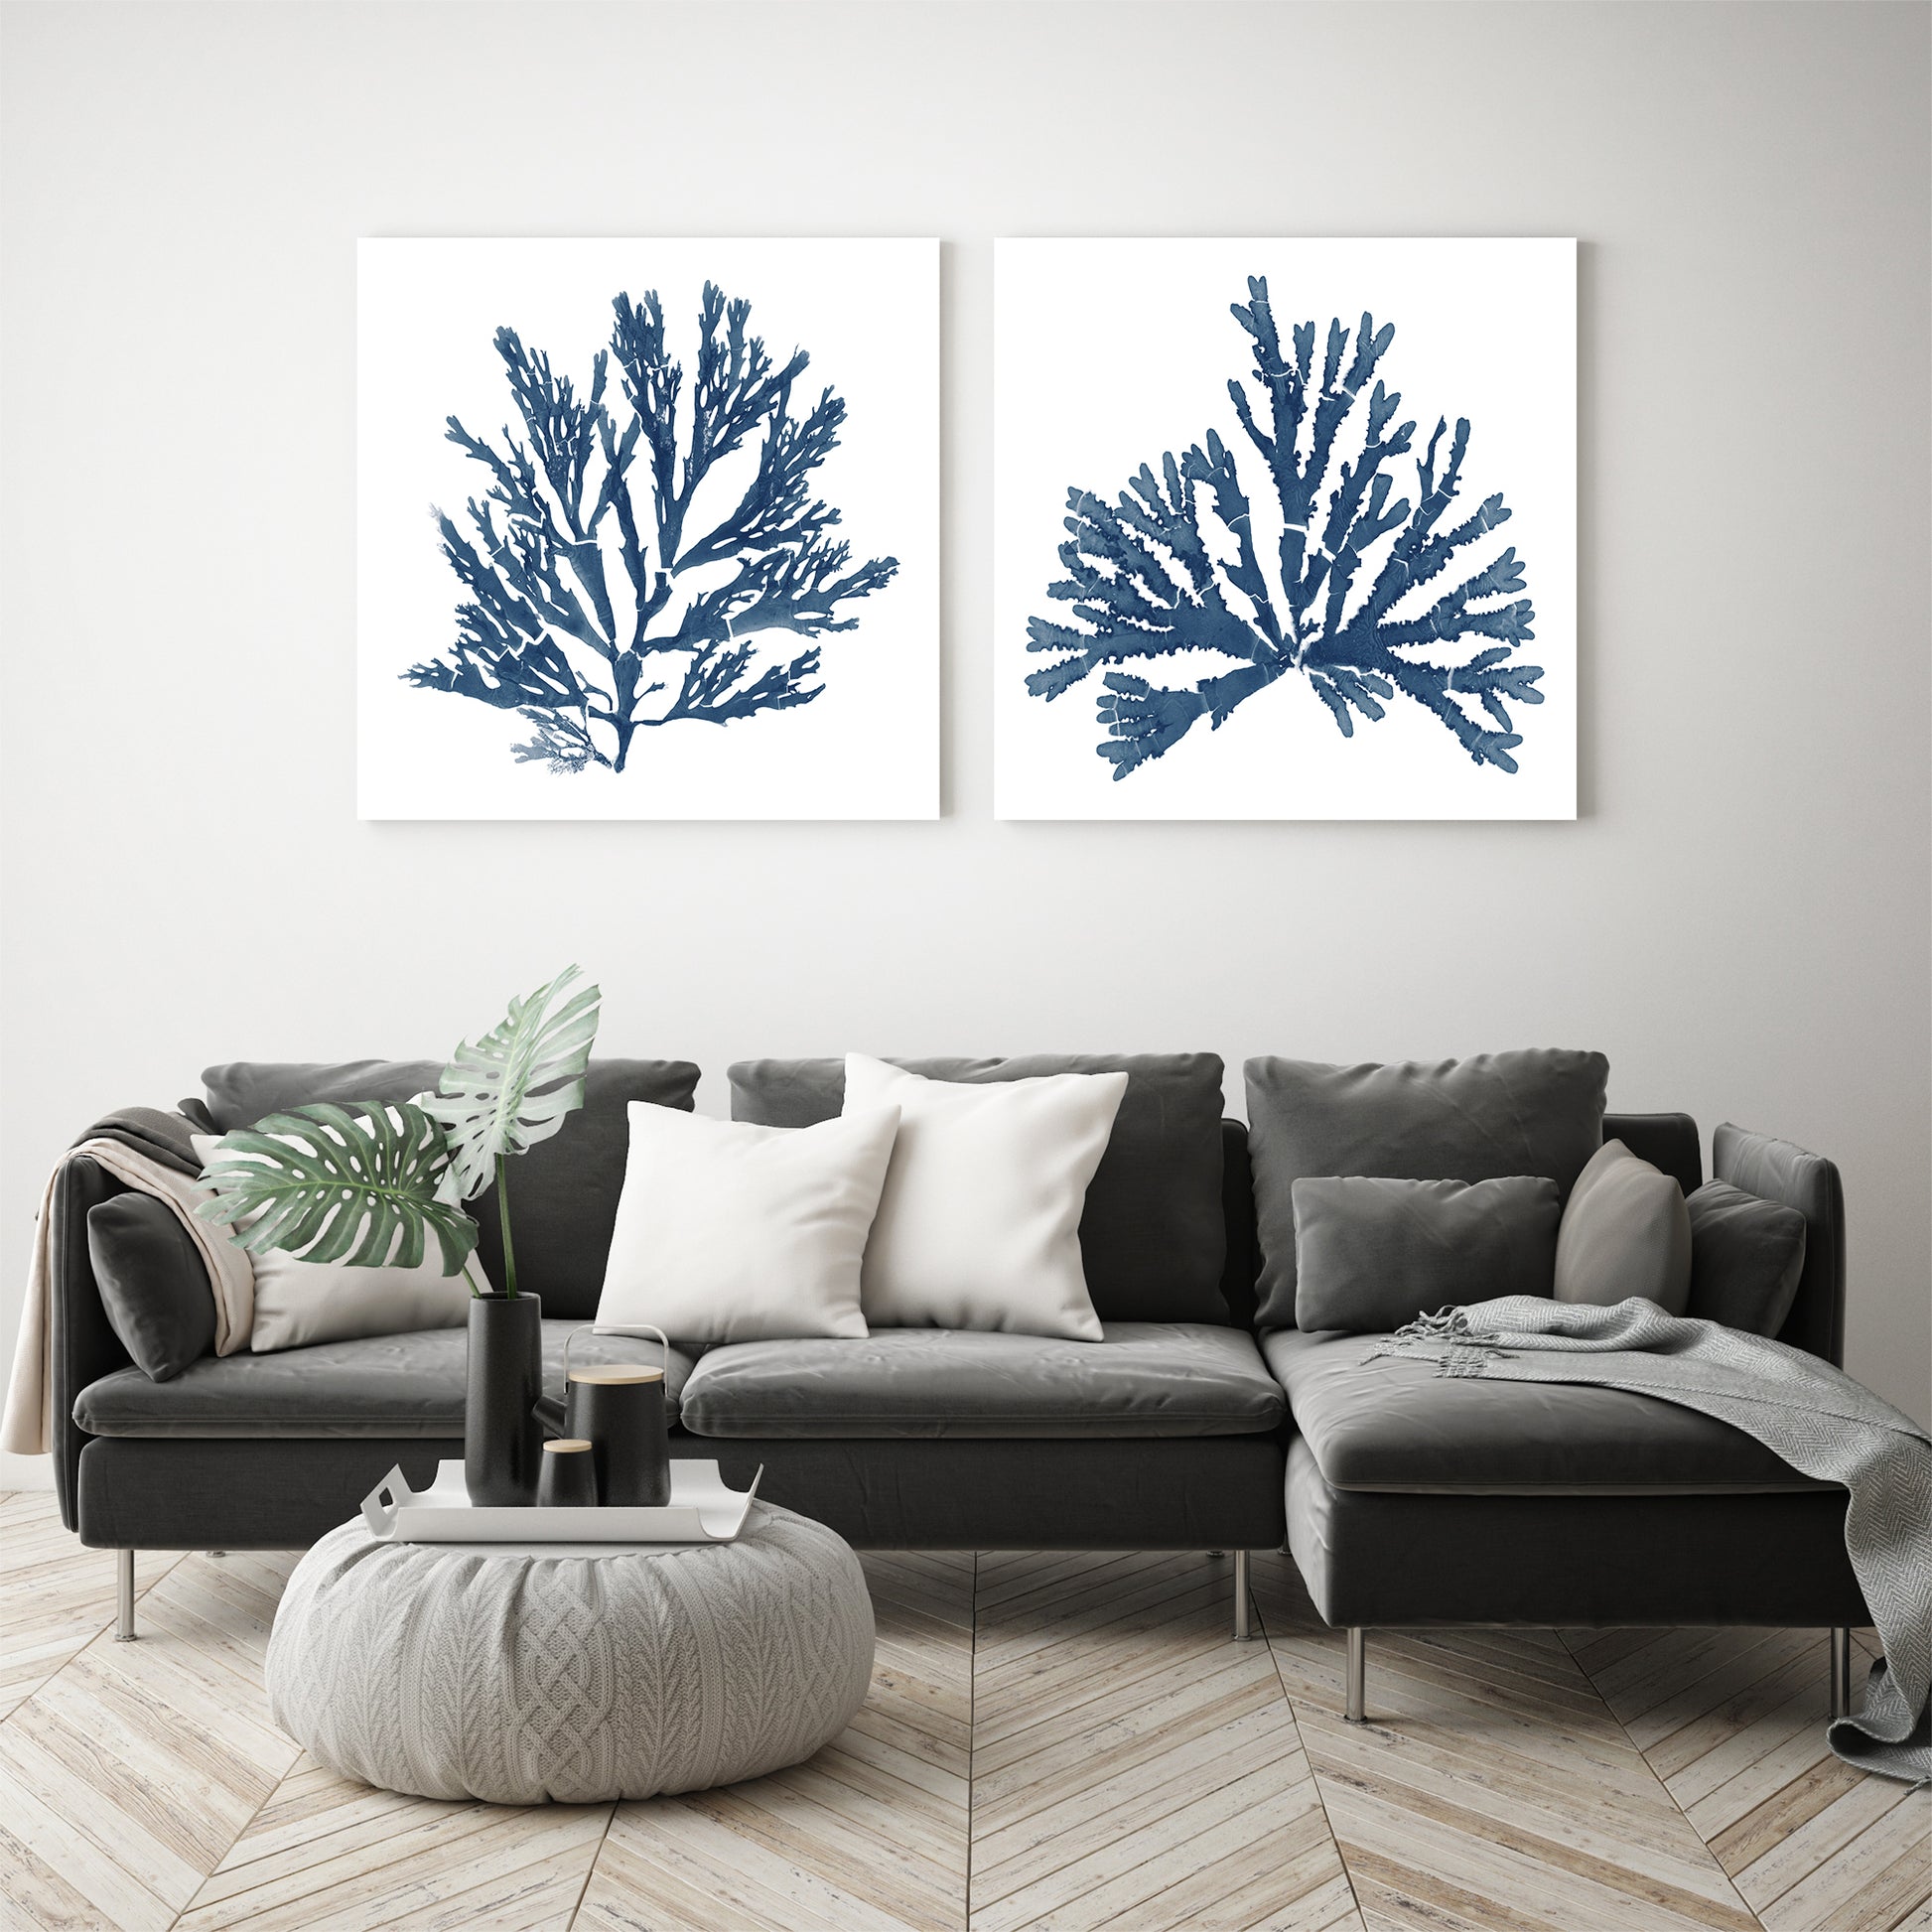 Pacific Sea Mosses Blue On White - 2 Piece Gallery Wrapped Canvas Set by Wild Apple Portfolio - Art Set - Americanflat